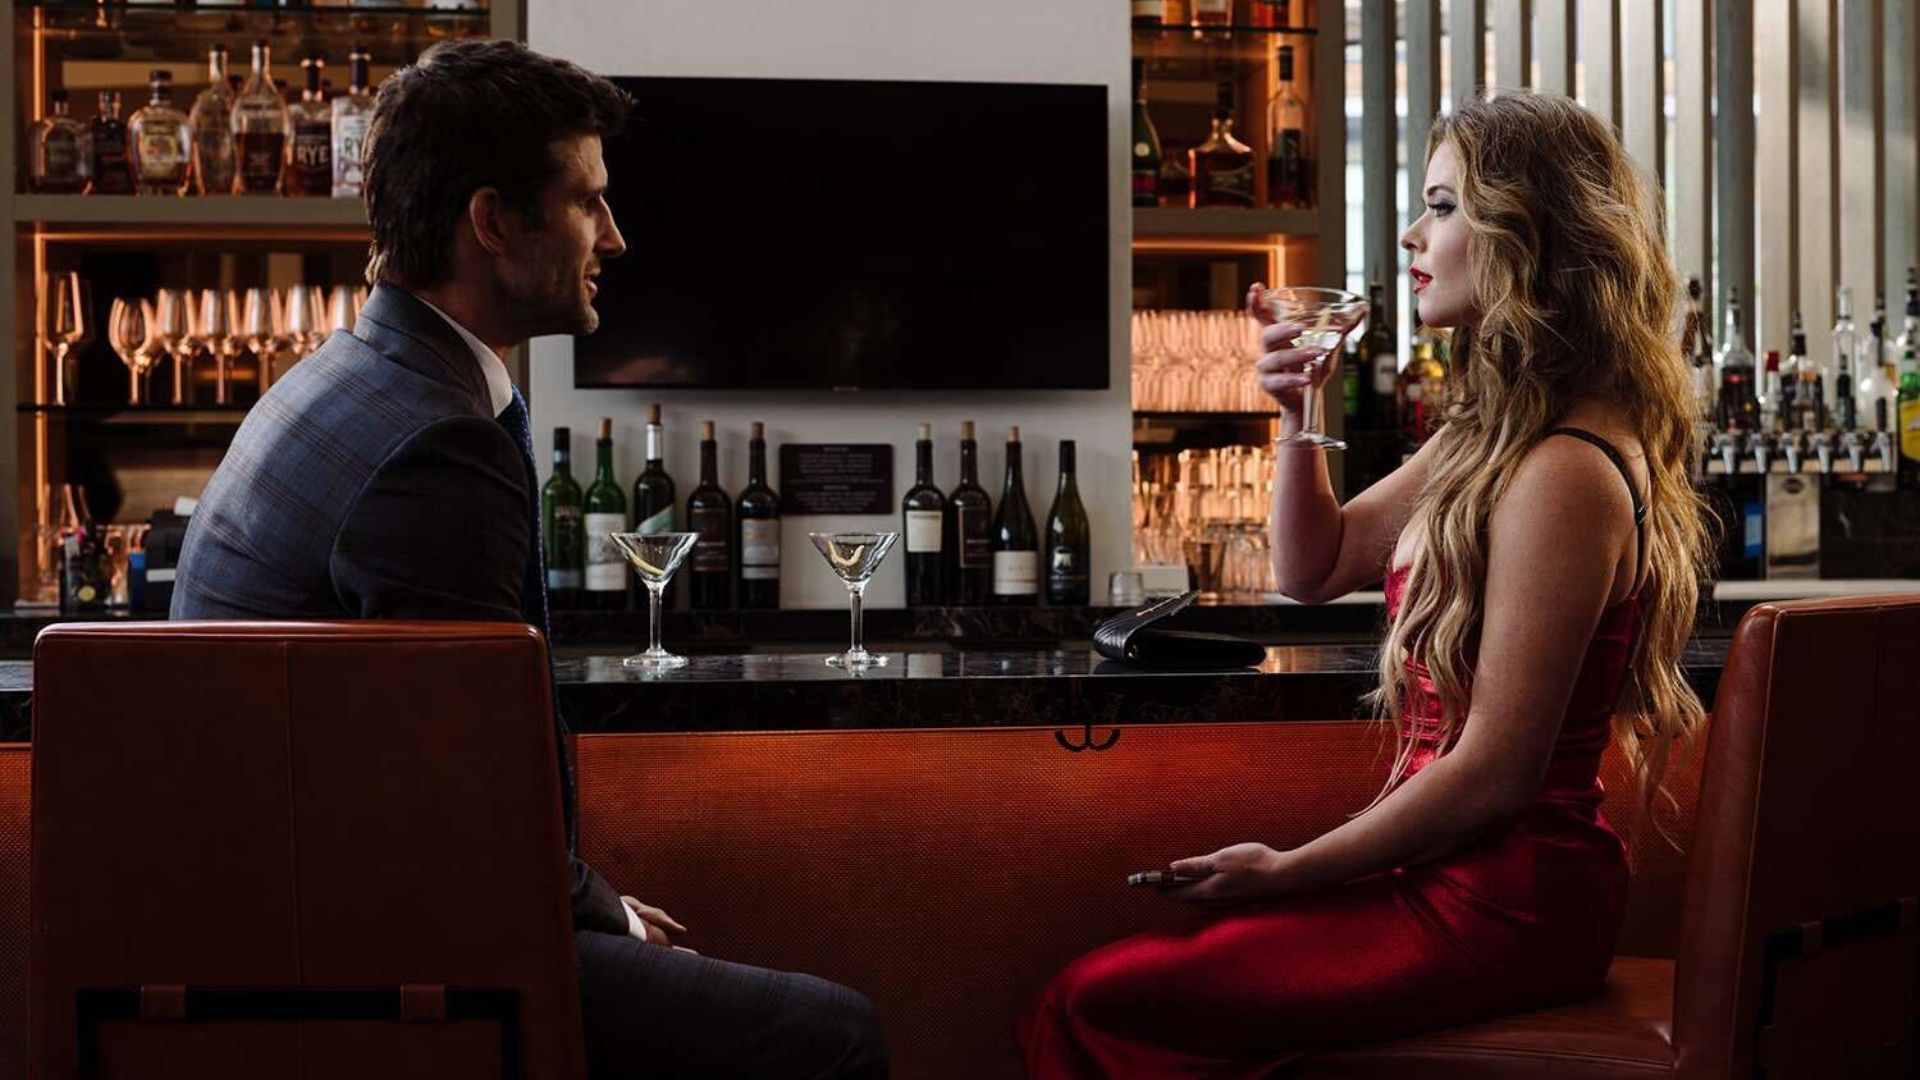 Sasha Pieterse and Parker Young sitting at a bar drinking and talking in The Image of You